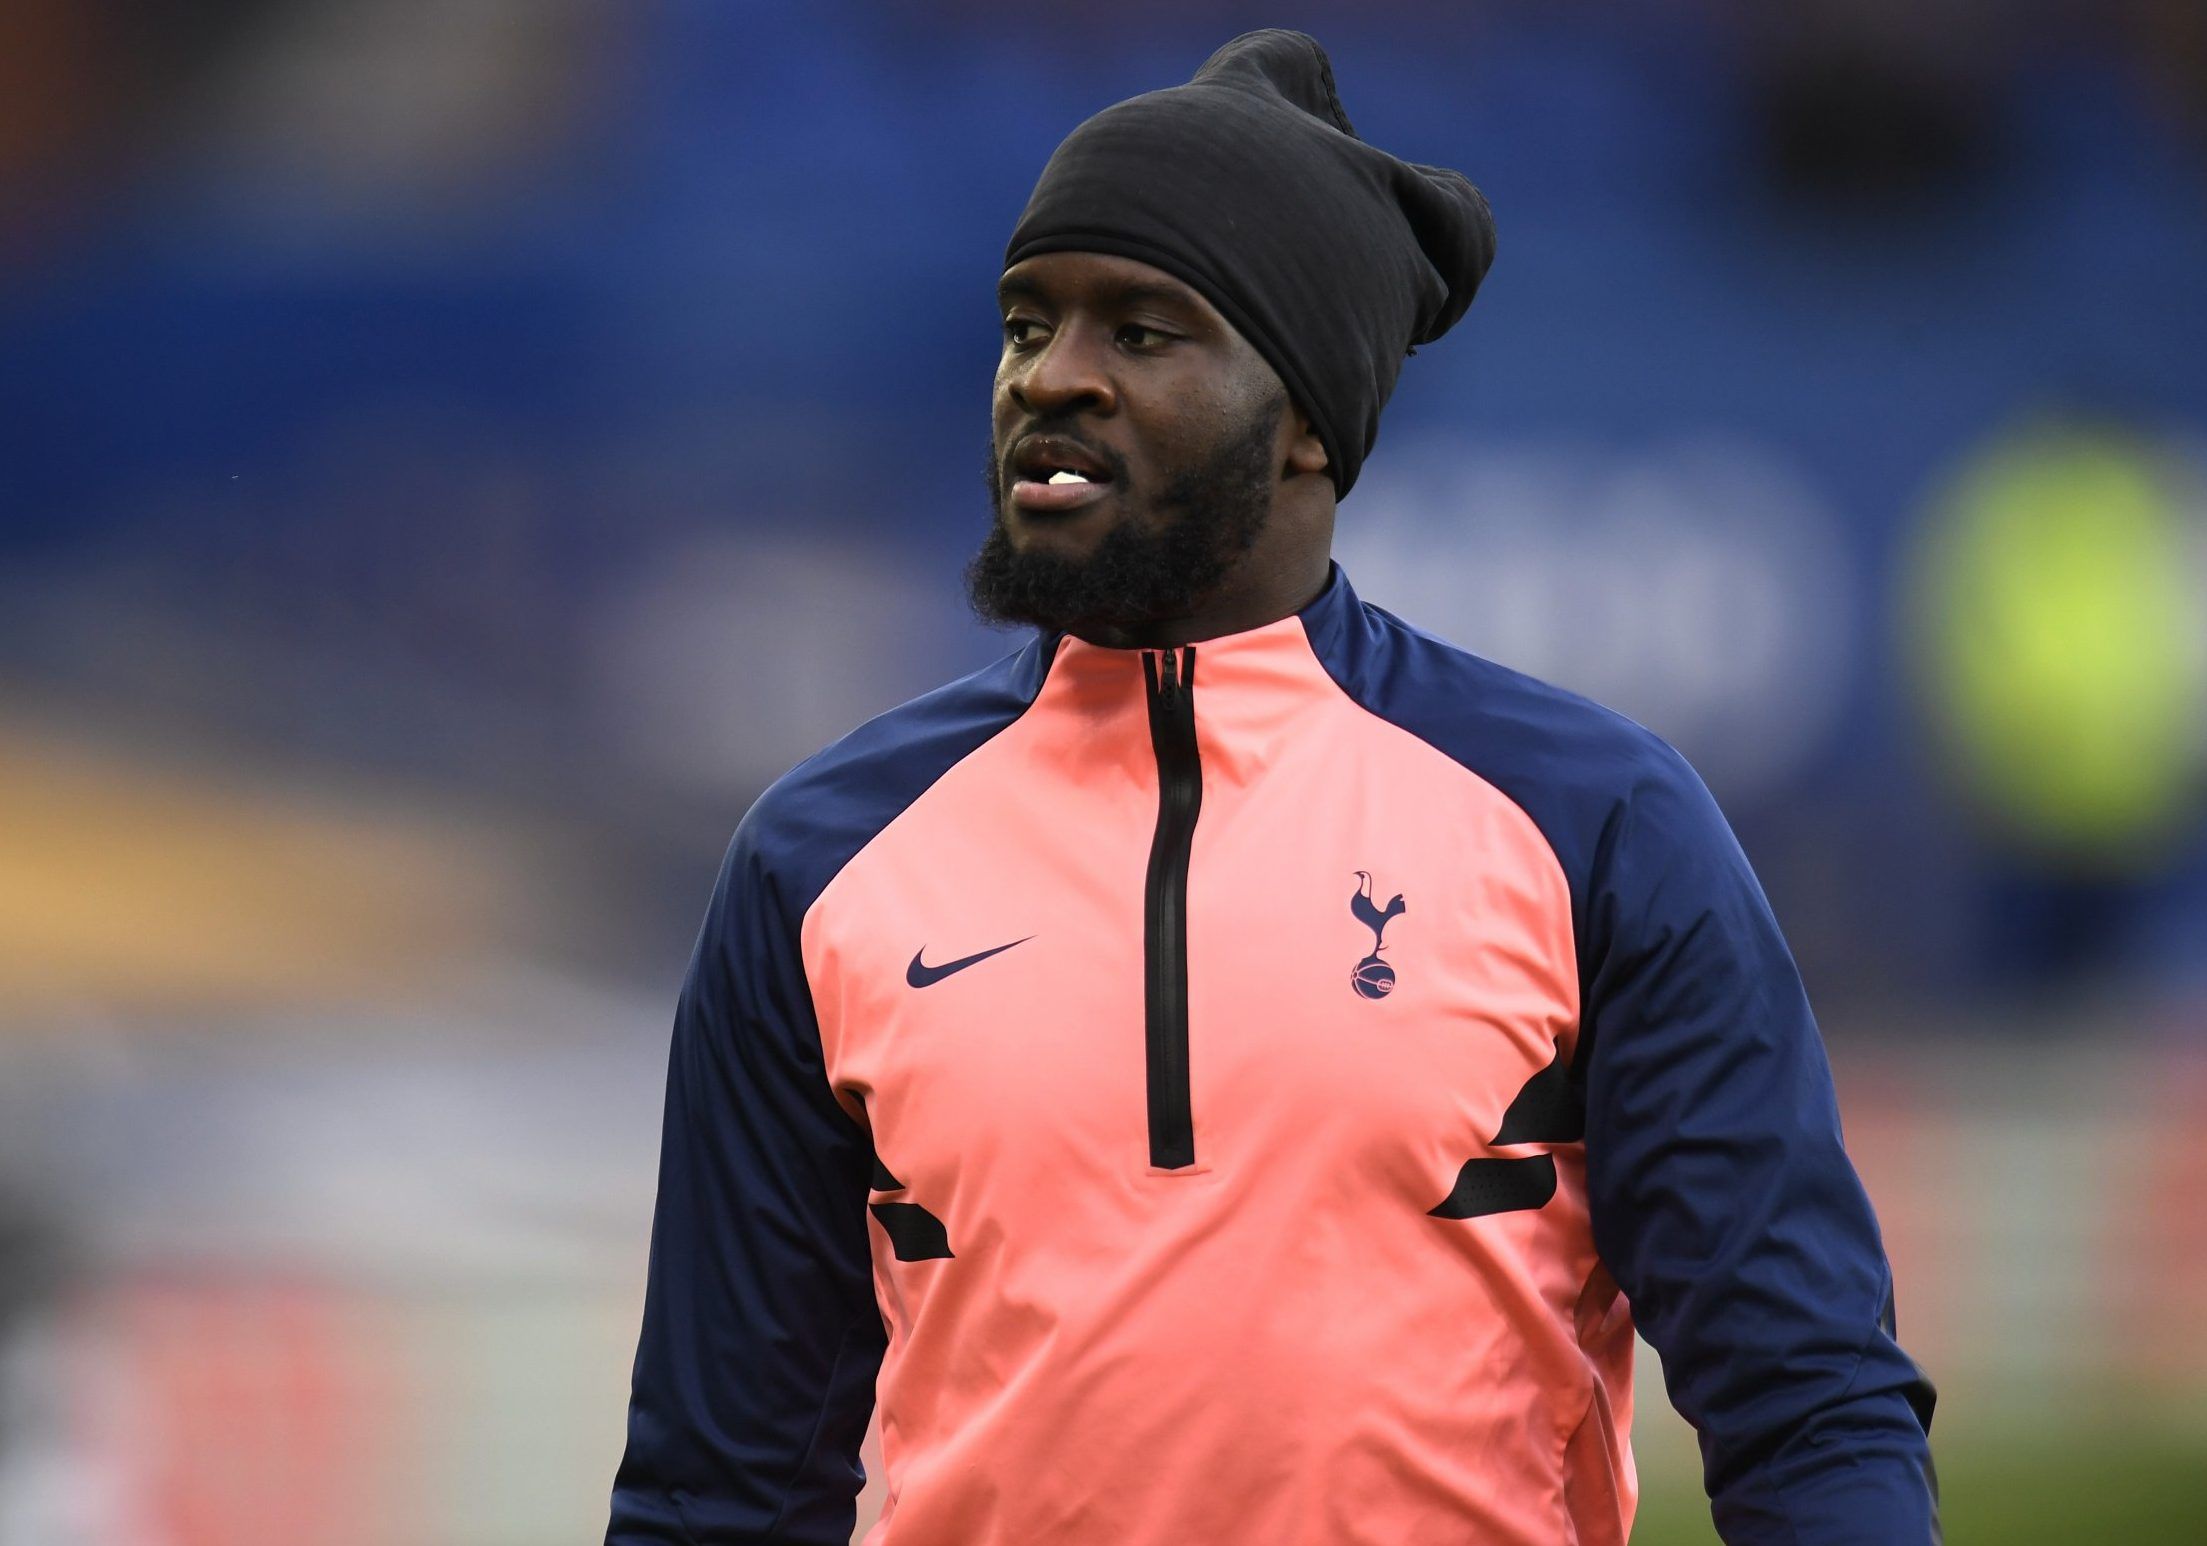 spurs midfielder tanguy ndombele looks on during warm up before kick off against everton in the premier league